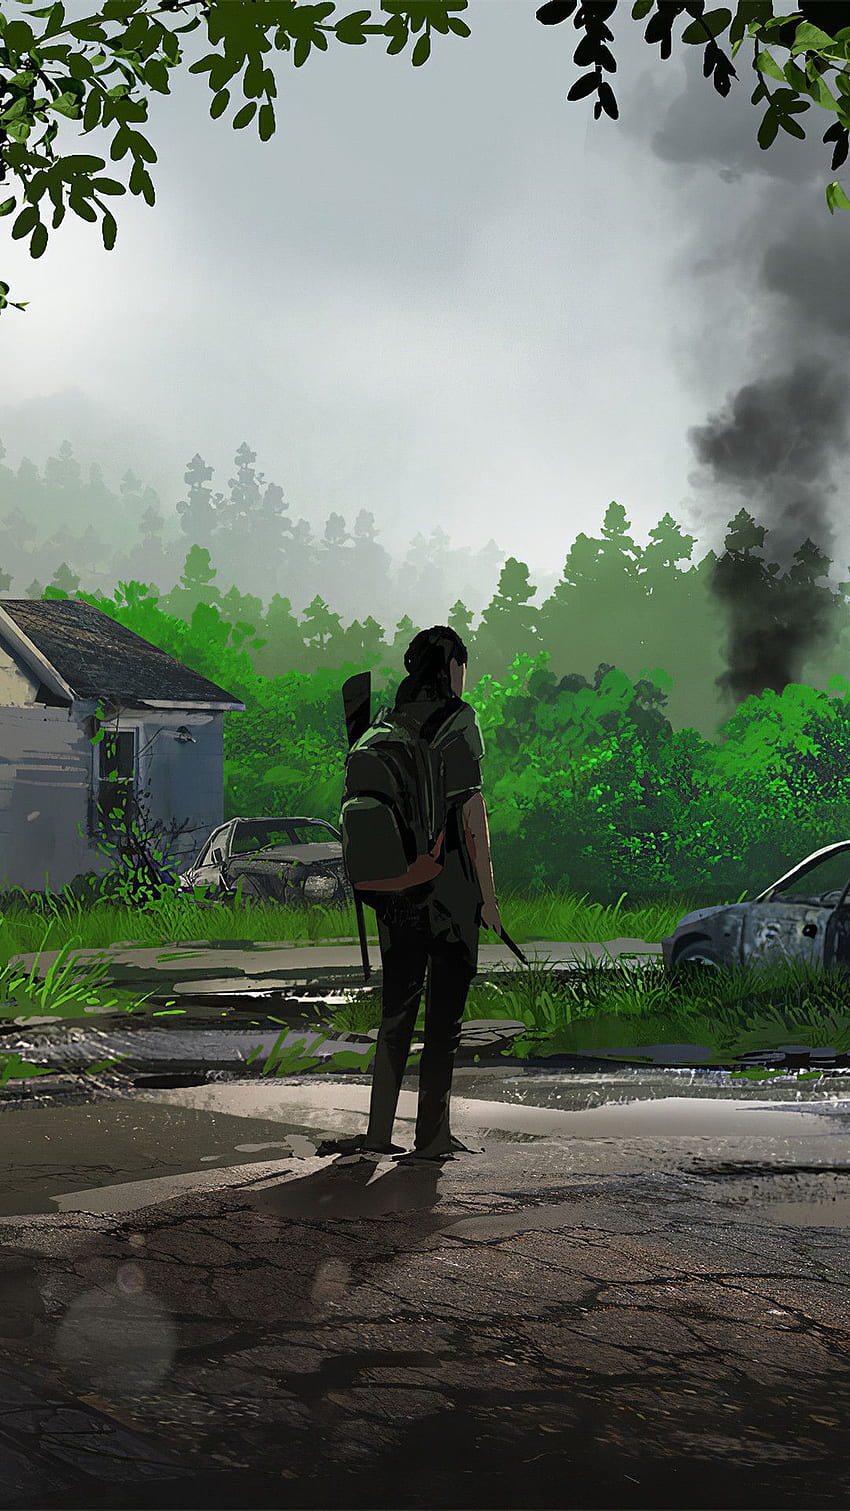 What TLOU wallpapers do you use on your phone Link your best ones here   rthelastofus